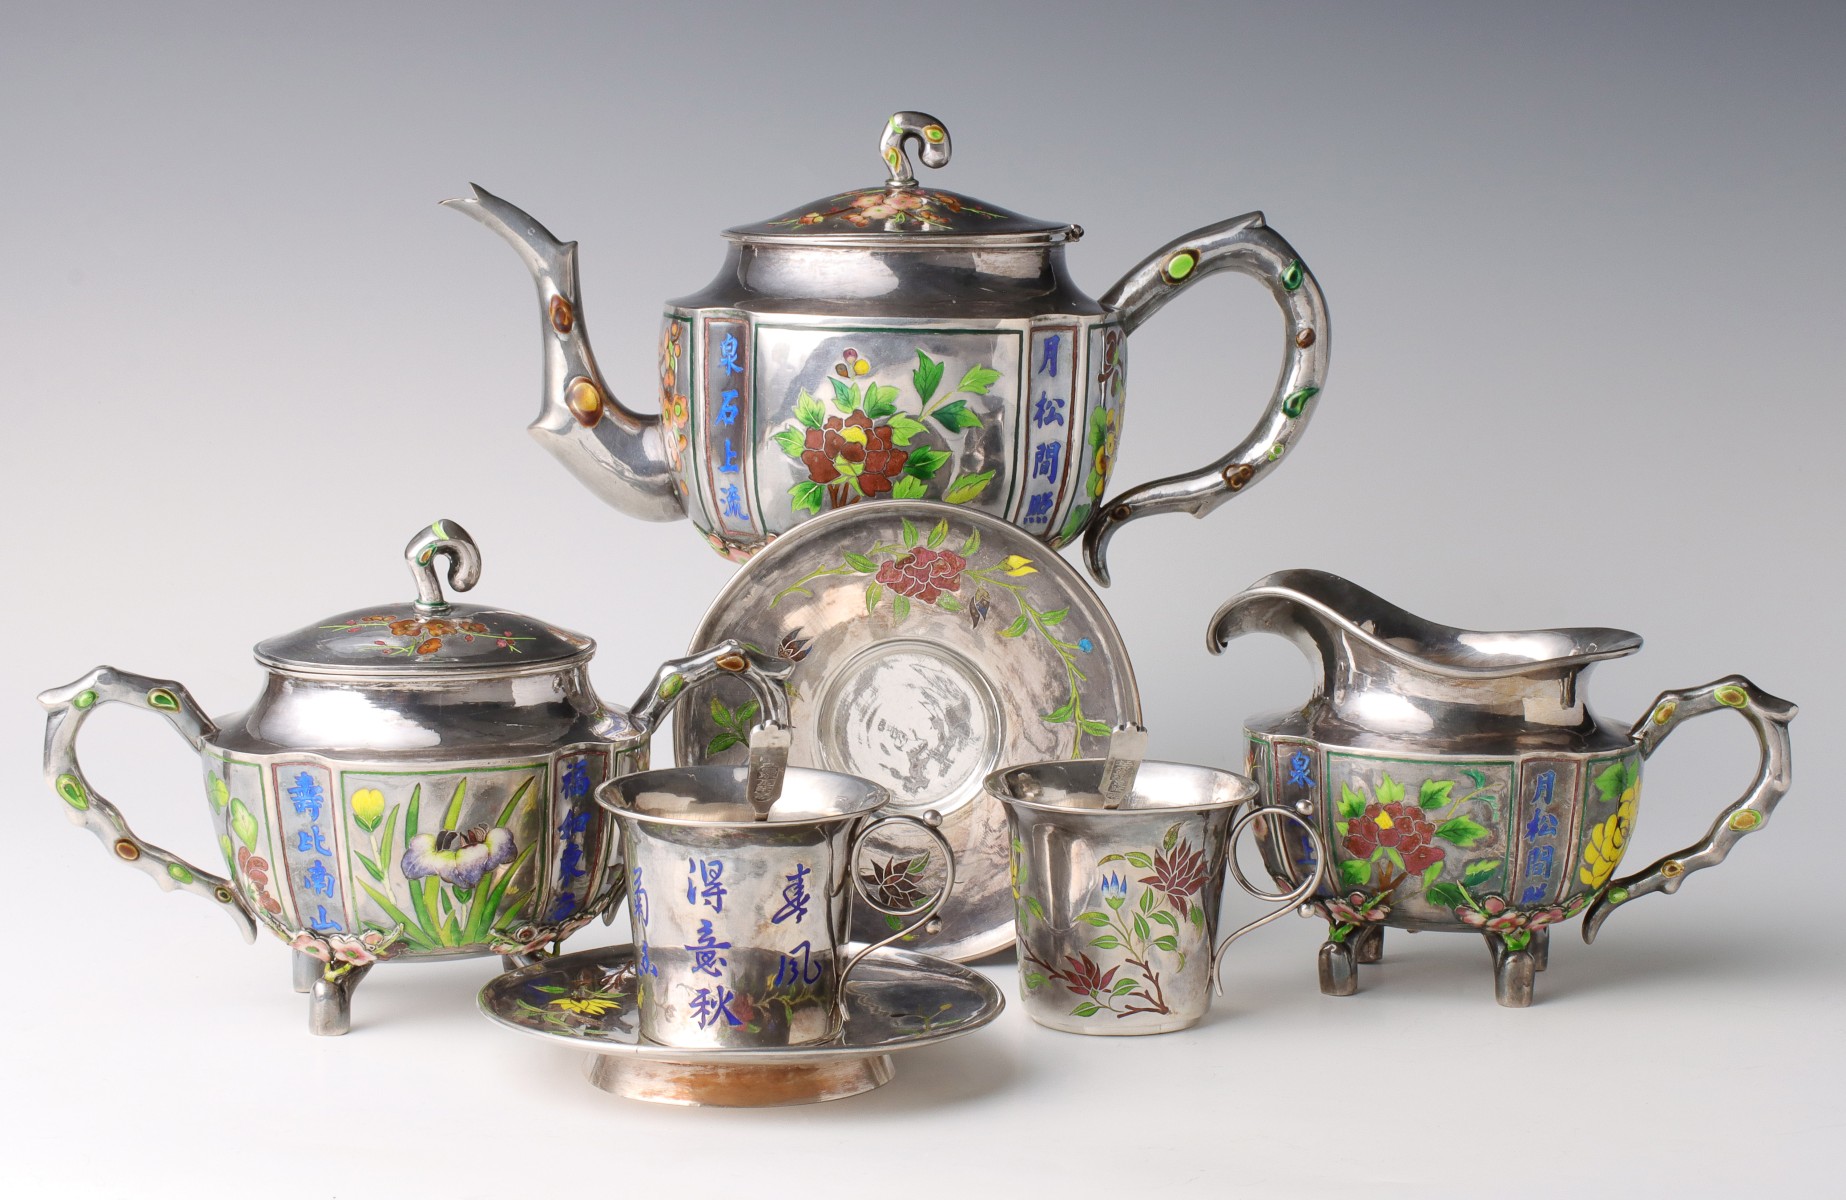 A SEVEN PIECE CHINESE EXPORT TEA SET WITH ENAMELING